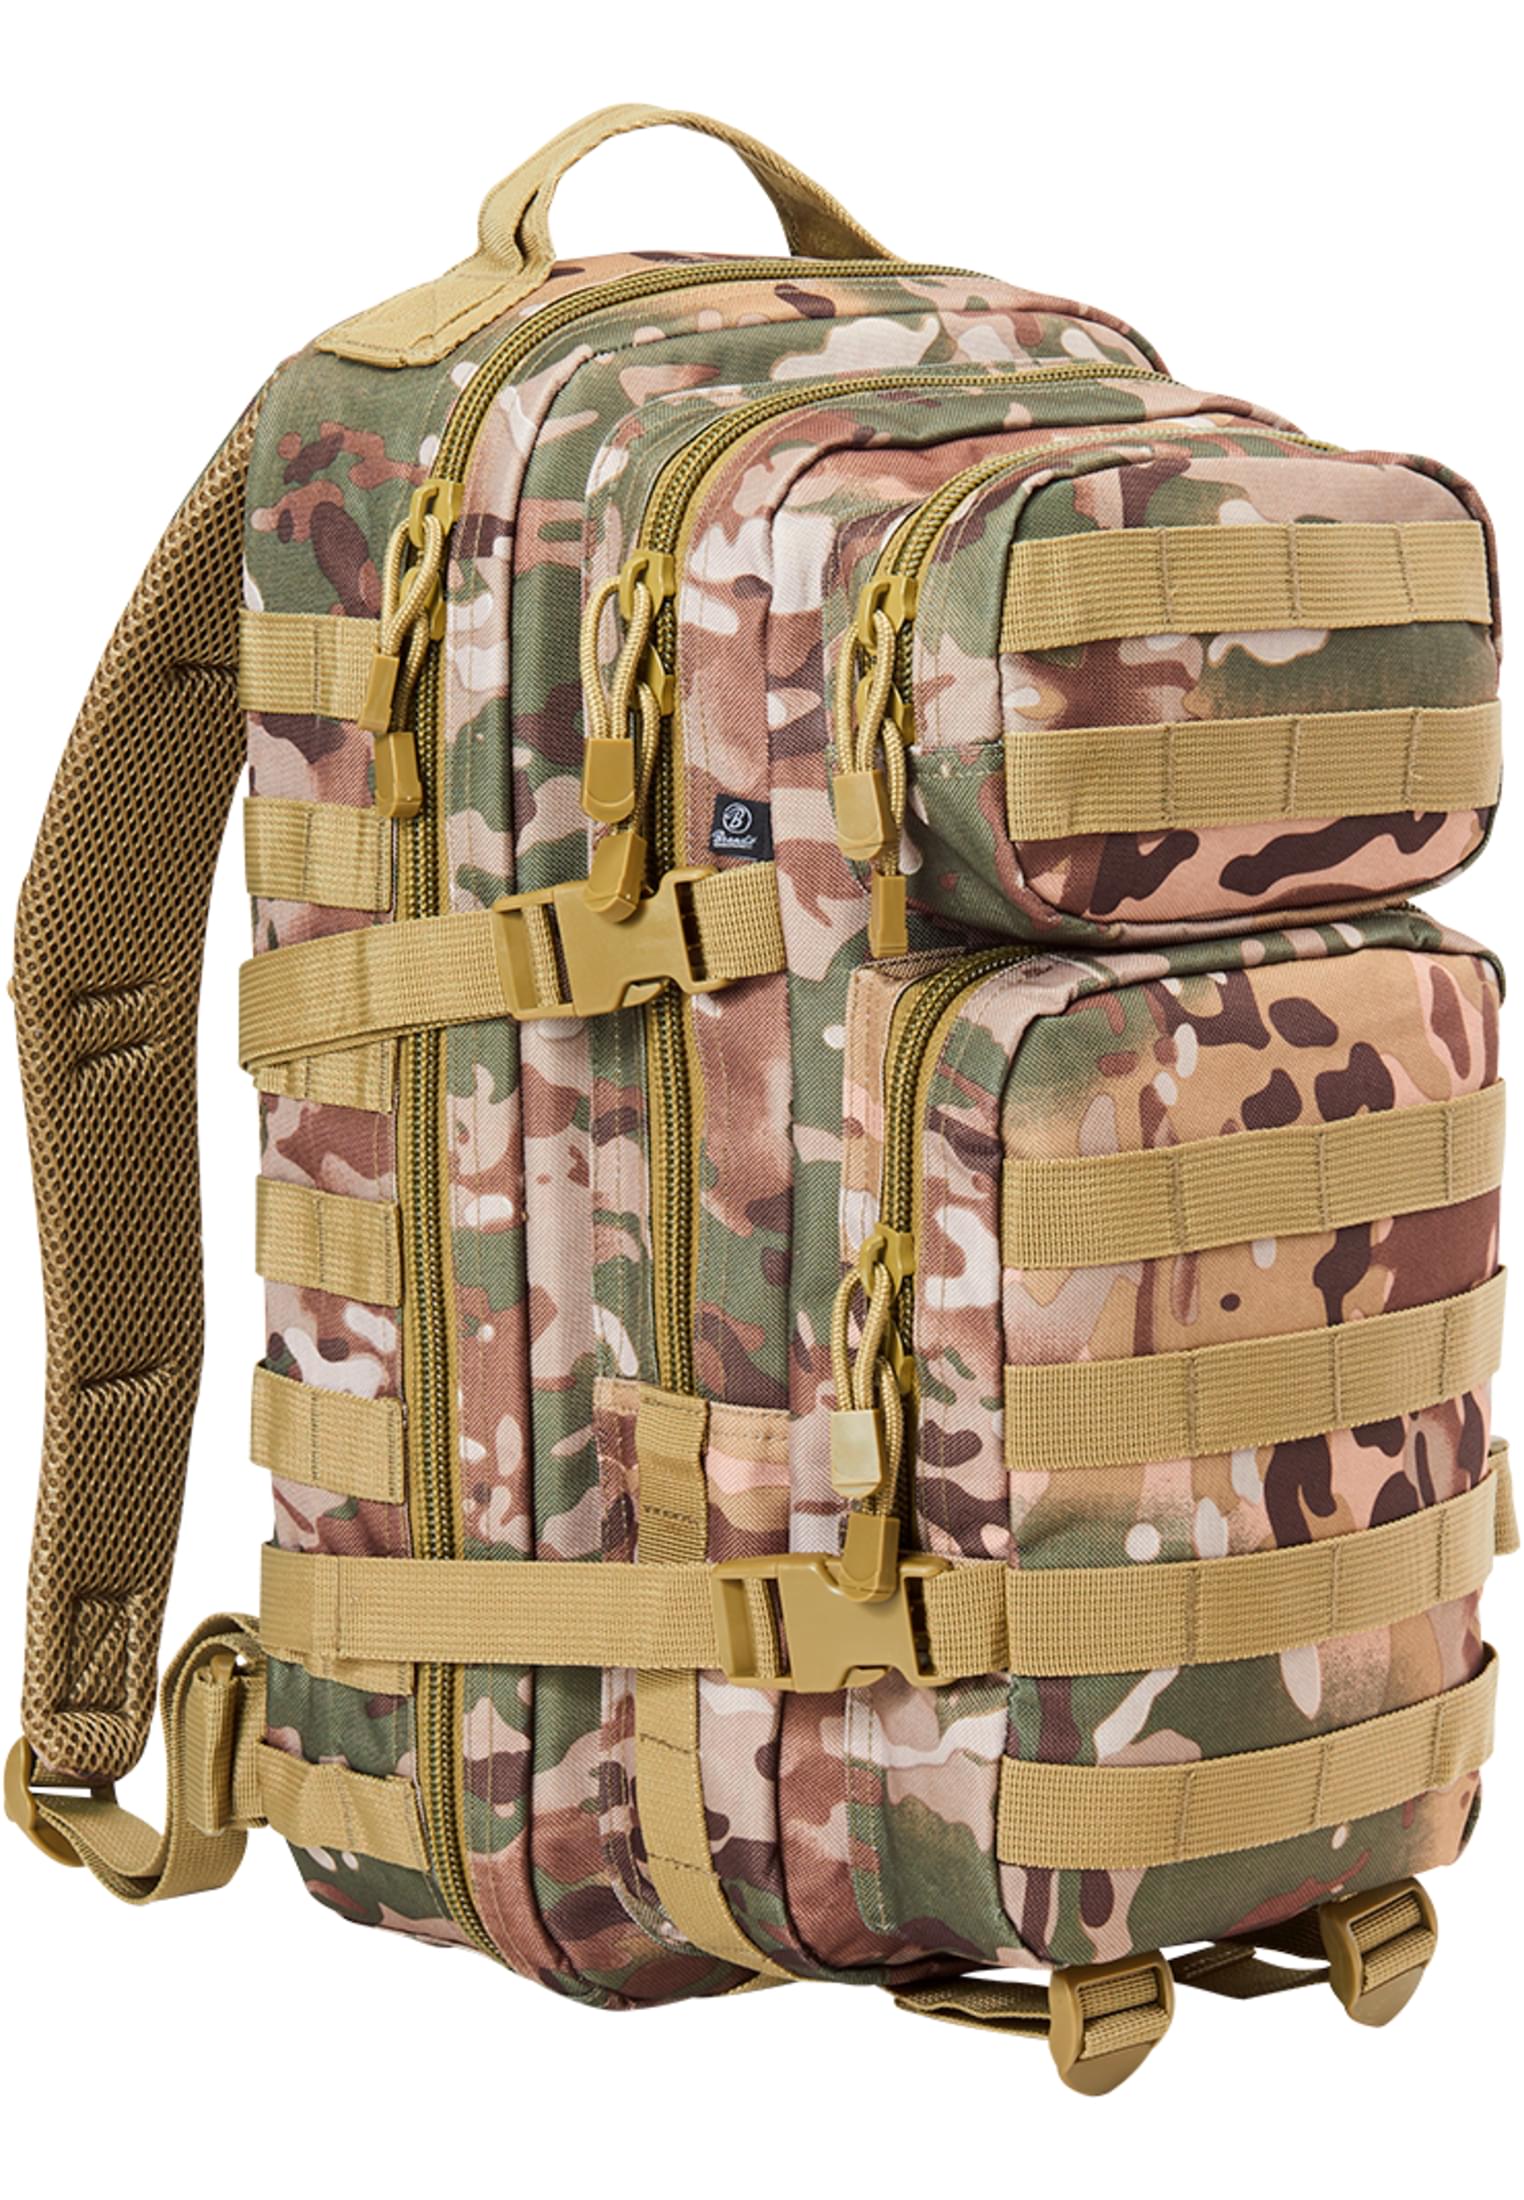 Medium American Cooper Backpack with Tactical Camouflage